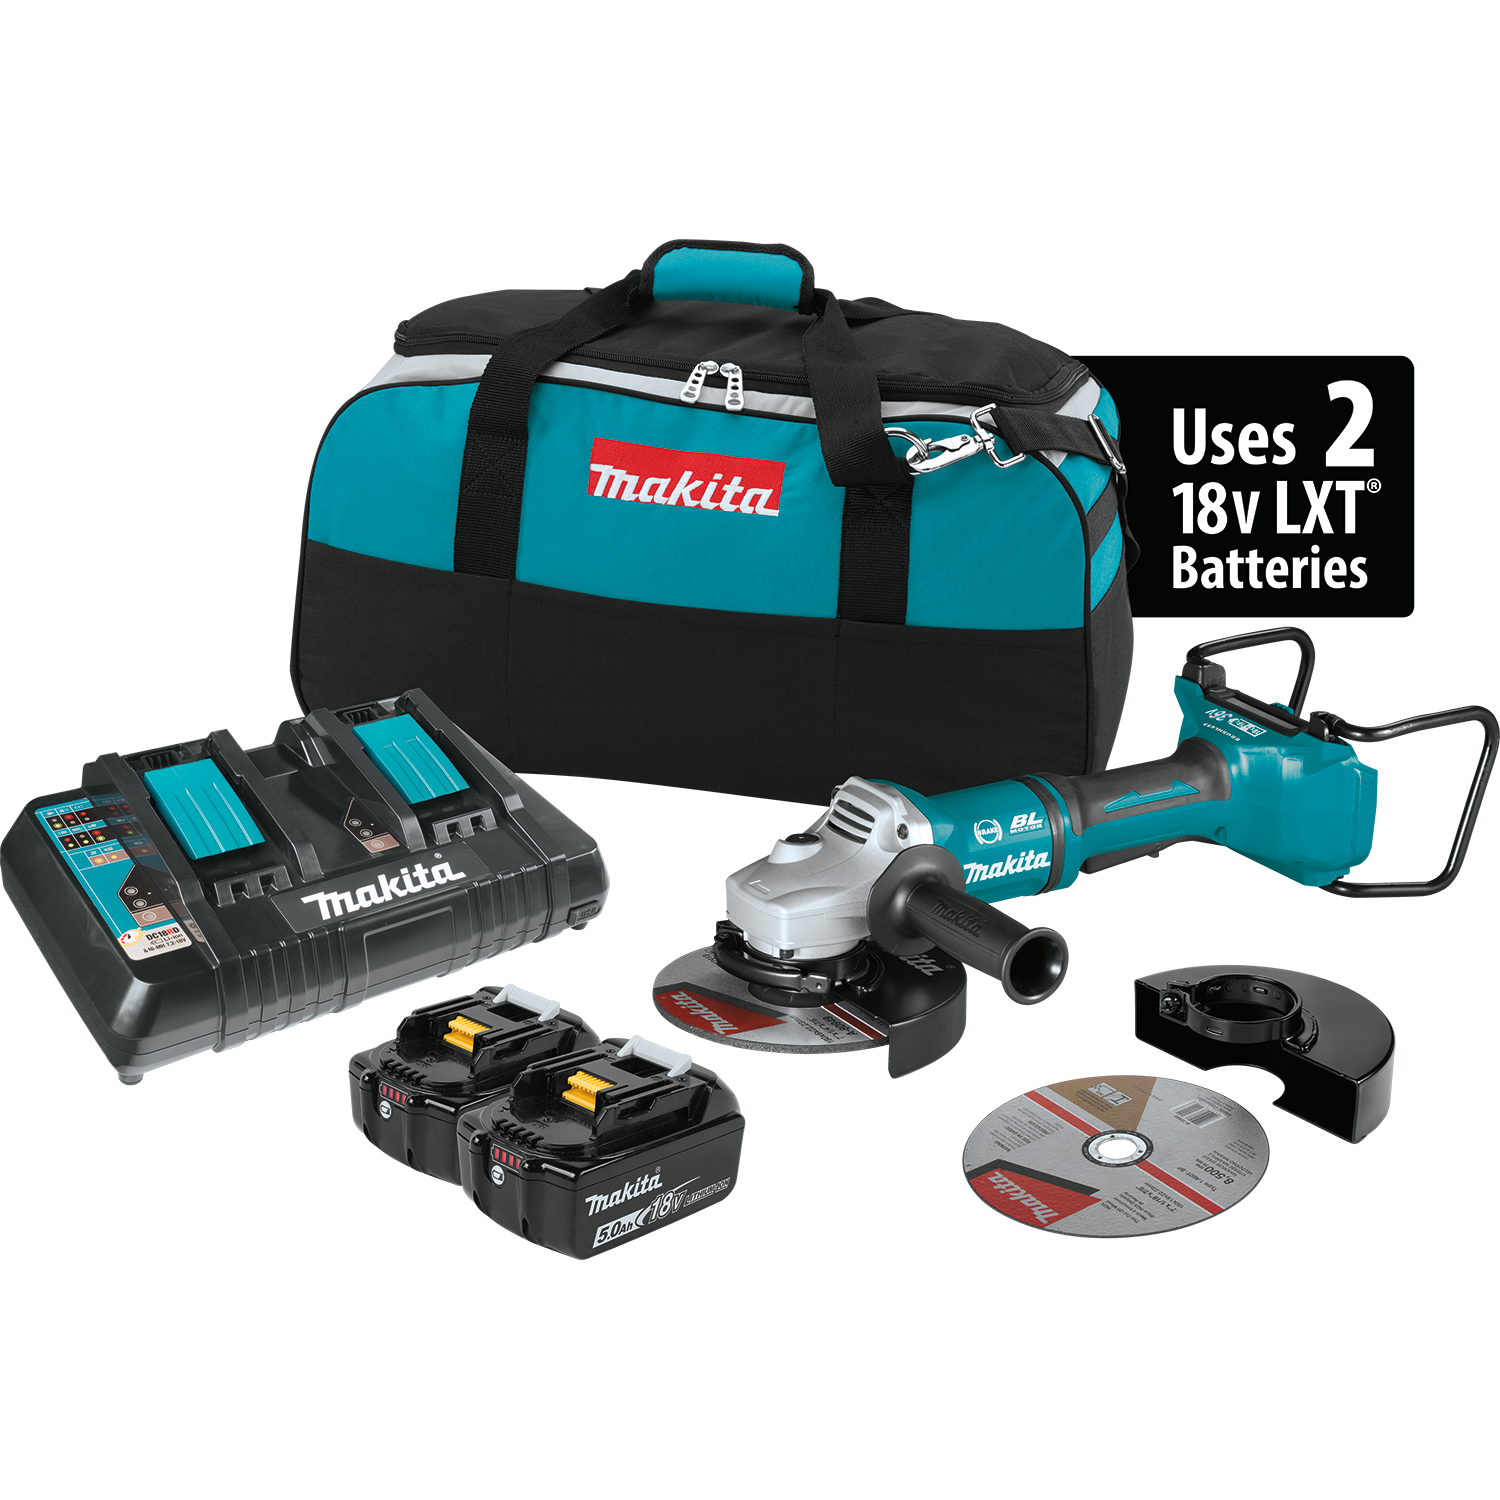 Makita, 7" Paddle Switch Cut‑Off/Angle Grinder Kit, with Electric Brake 18Vx2 - XAG12PT1